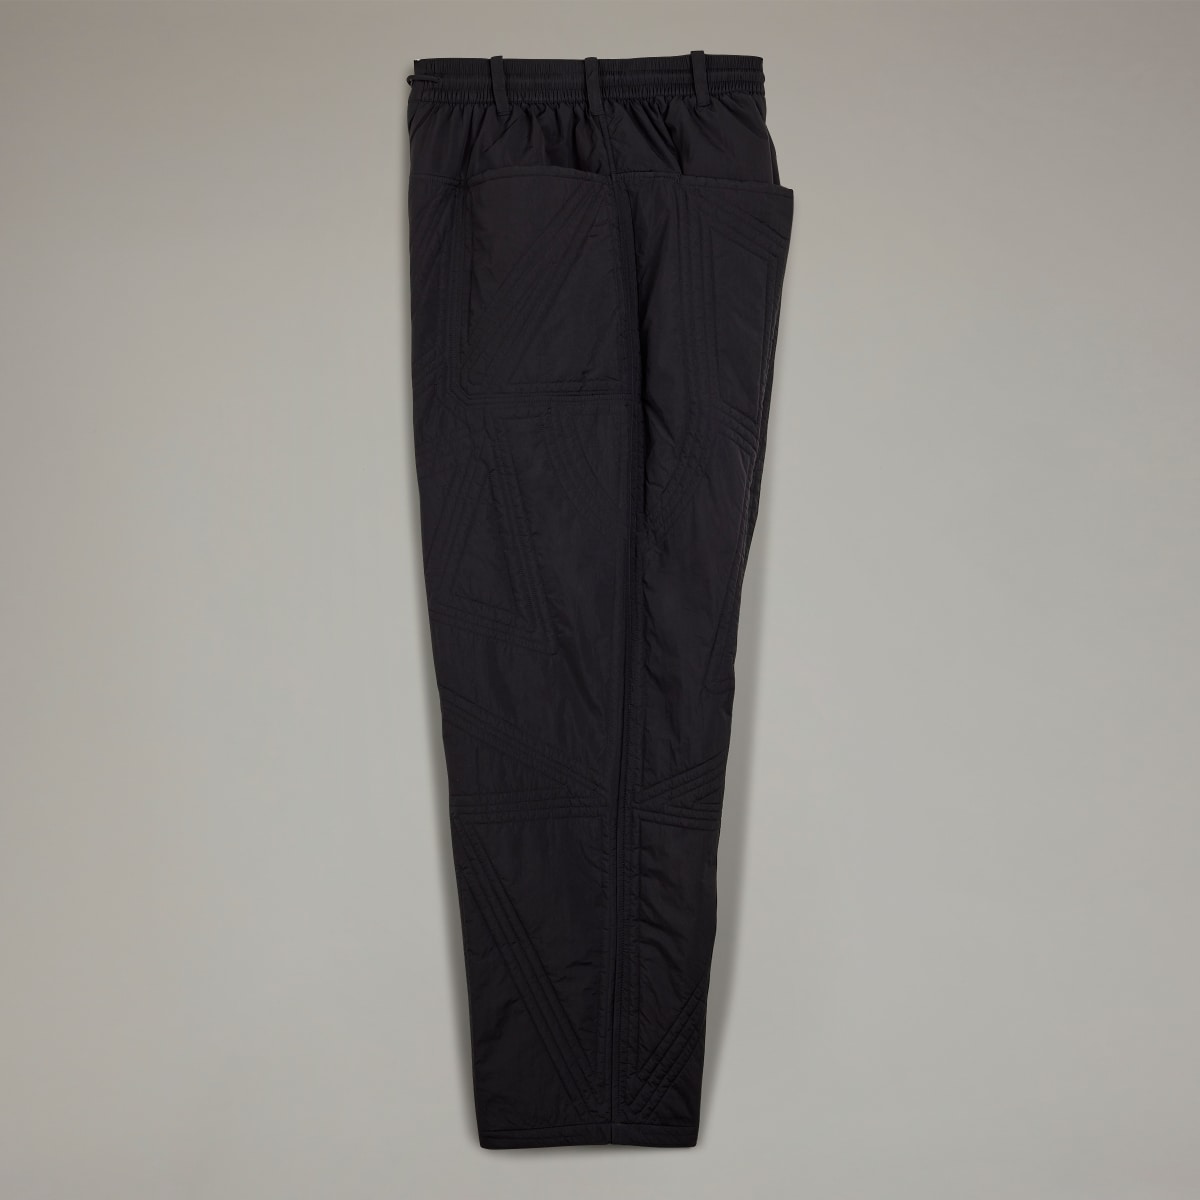 Adidas QUILTED PANTS. 5